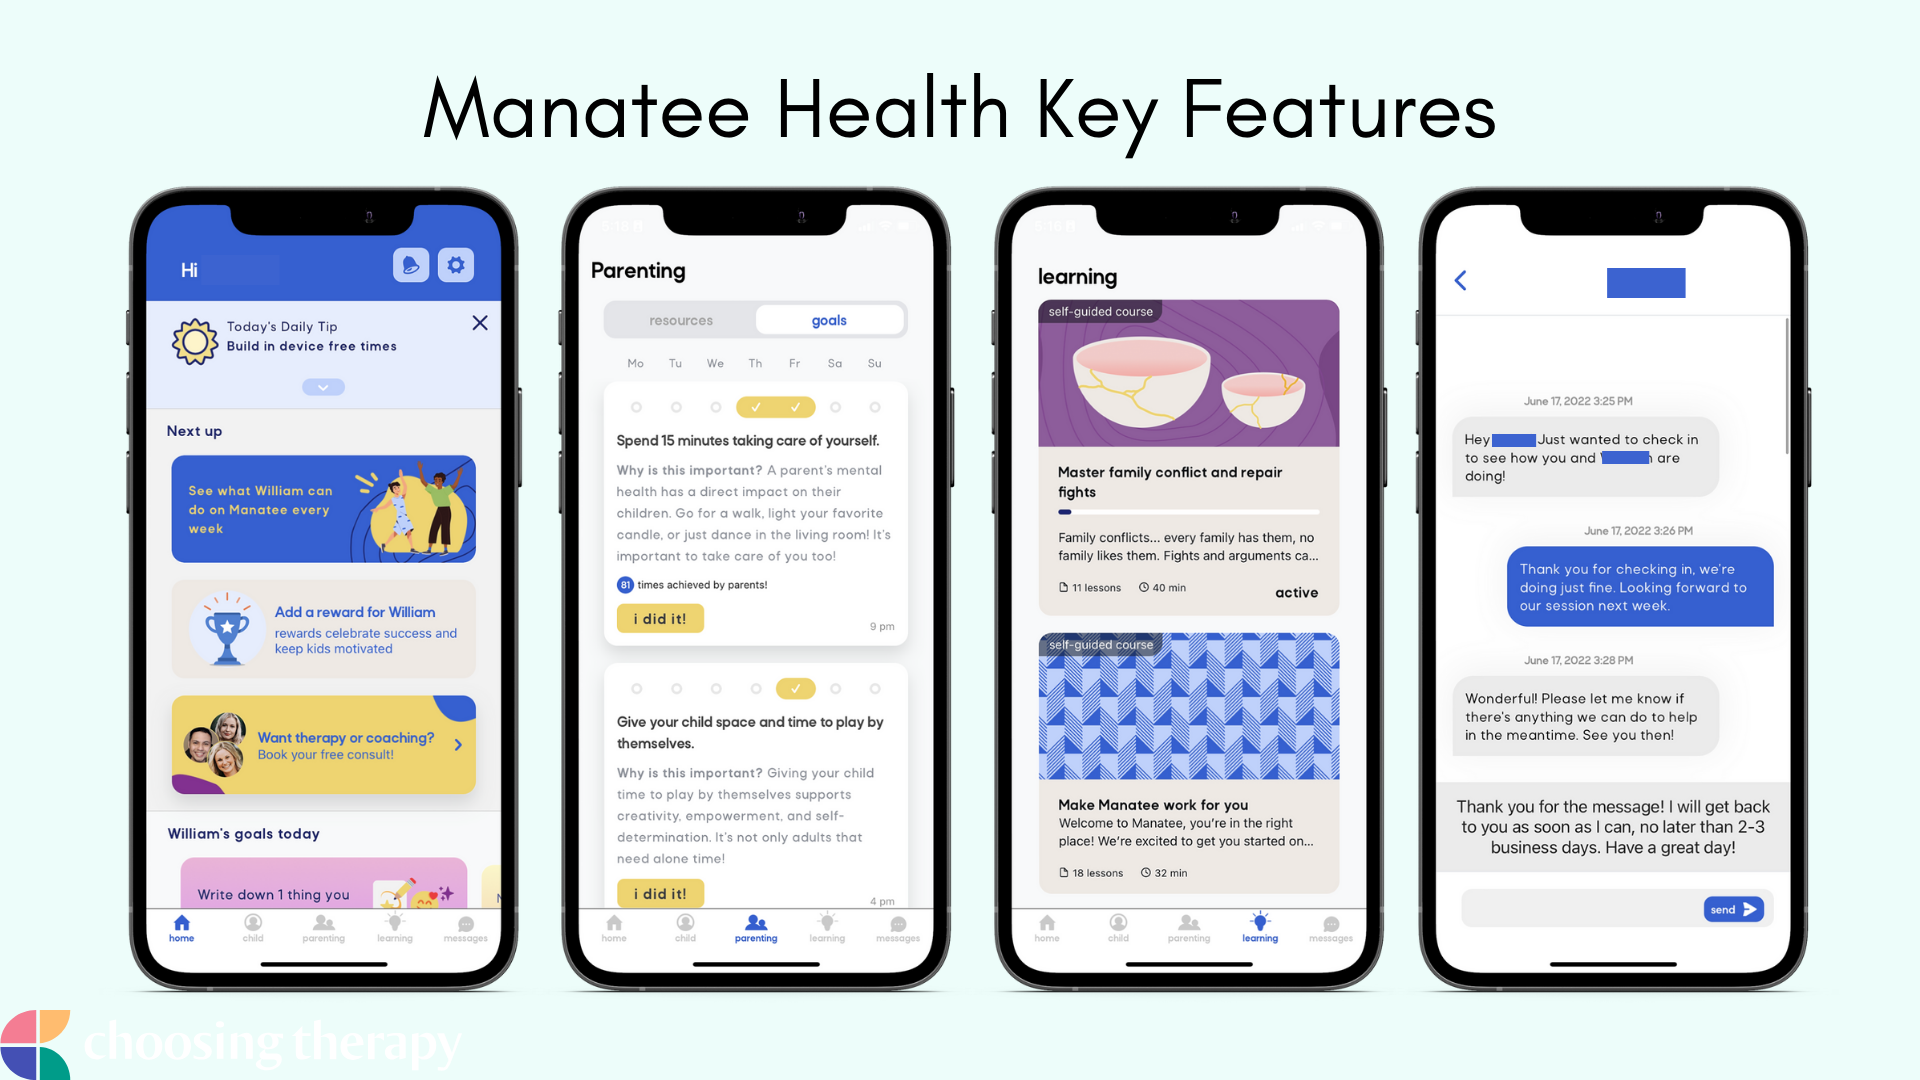 Image of Manatee Health's key features in the free Manatee app